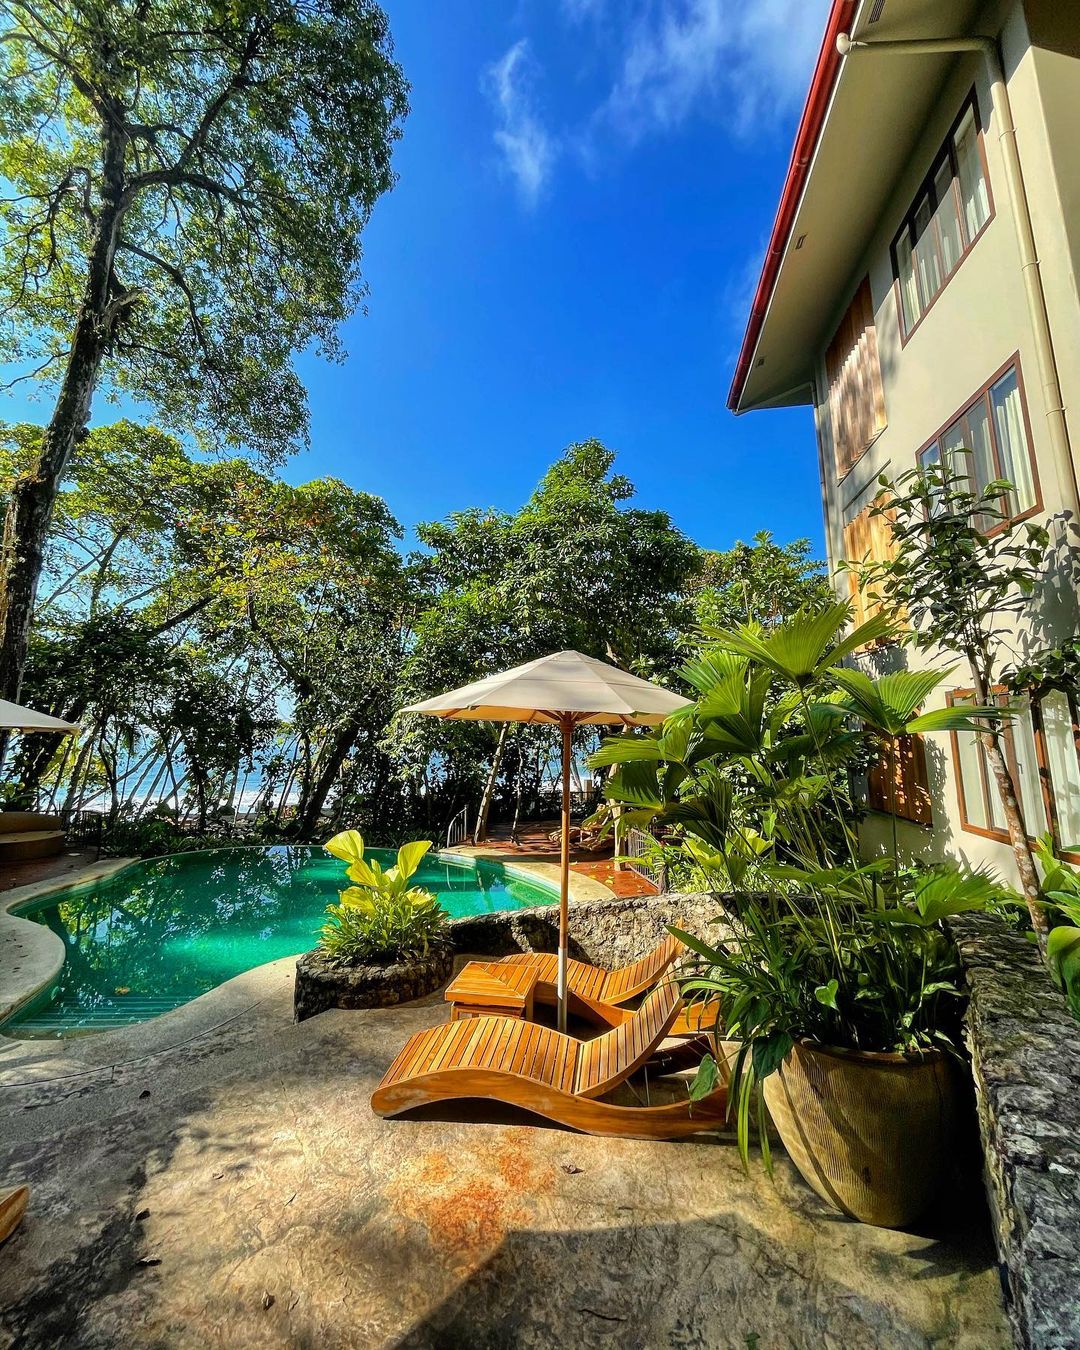 An inviting outdoor swimming pool surrounded by lush greenery with loungers and umbrellas awaiting poolside relaxation.